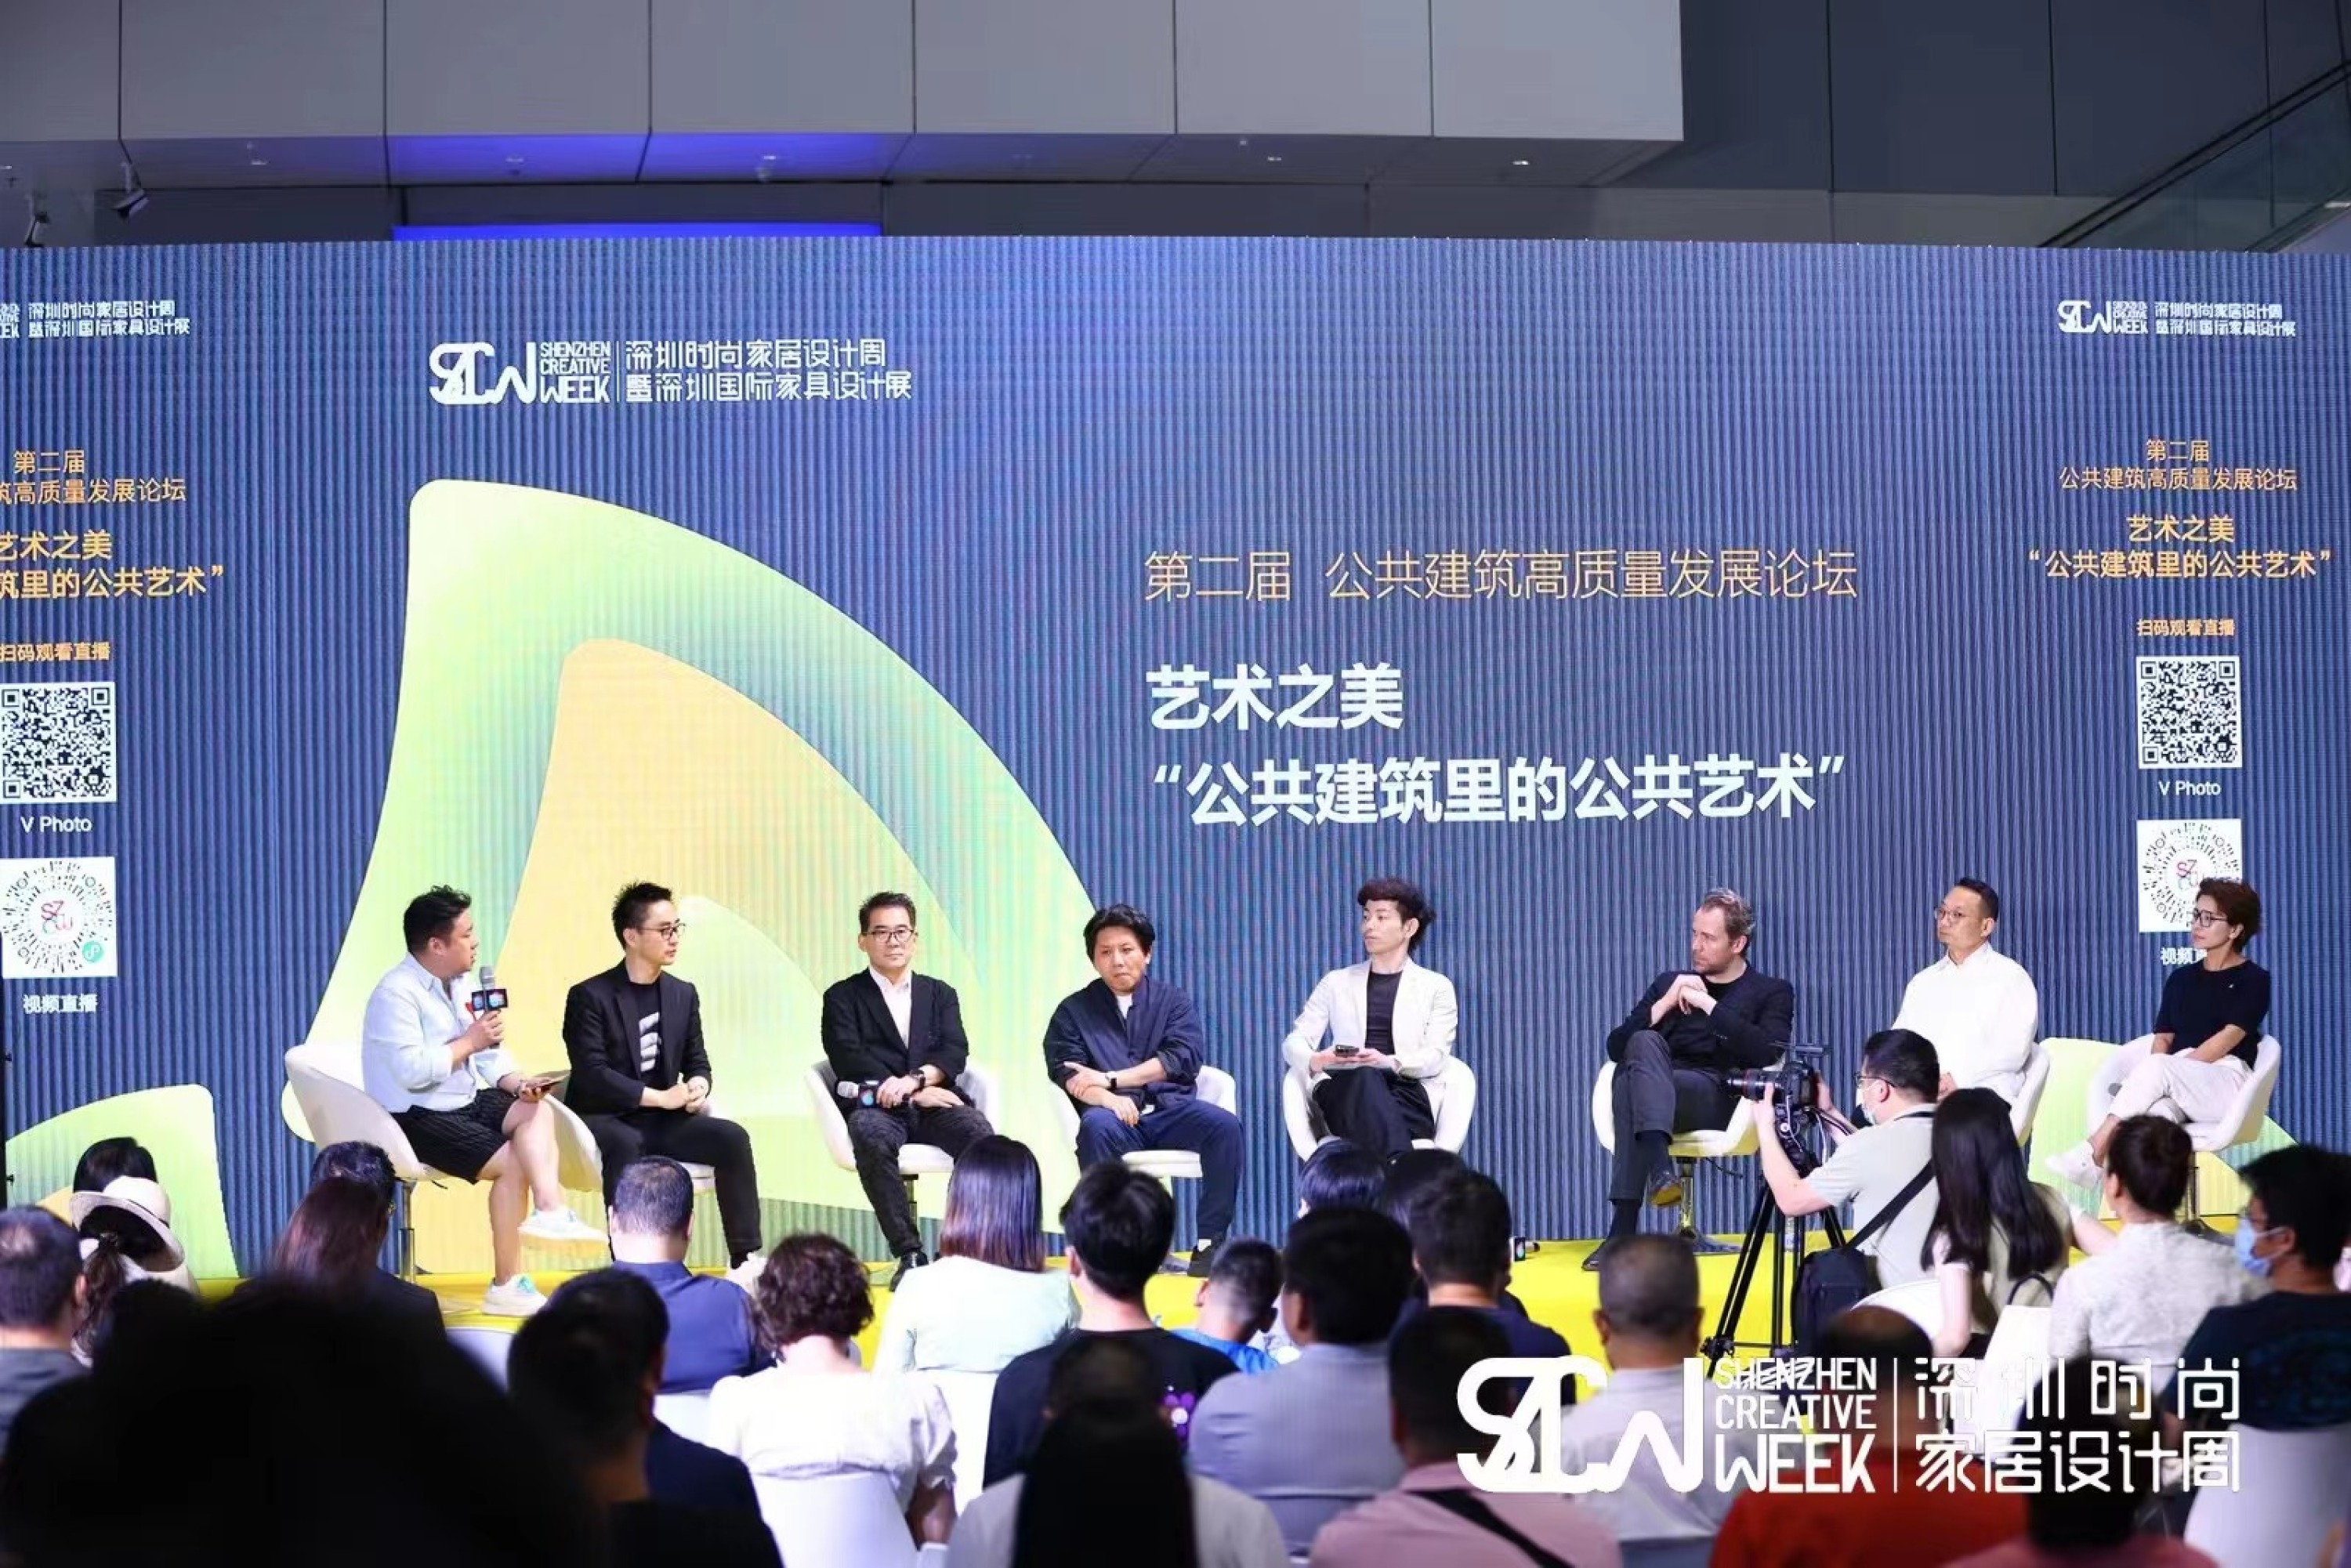 Zigeng Wang Participated in the 2nd Shenzhen Forum on “High-Quality Development of Public Buildings,” hosted by the Bureau of Shenzhen Public Works. He Gave a Speech on “Installation, Space, and Biennale: Several Methods to be Involved in Urban Publicness.”